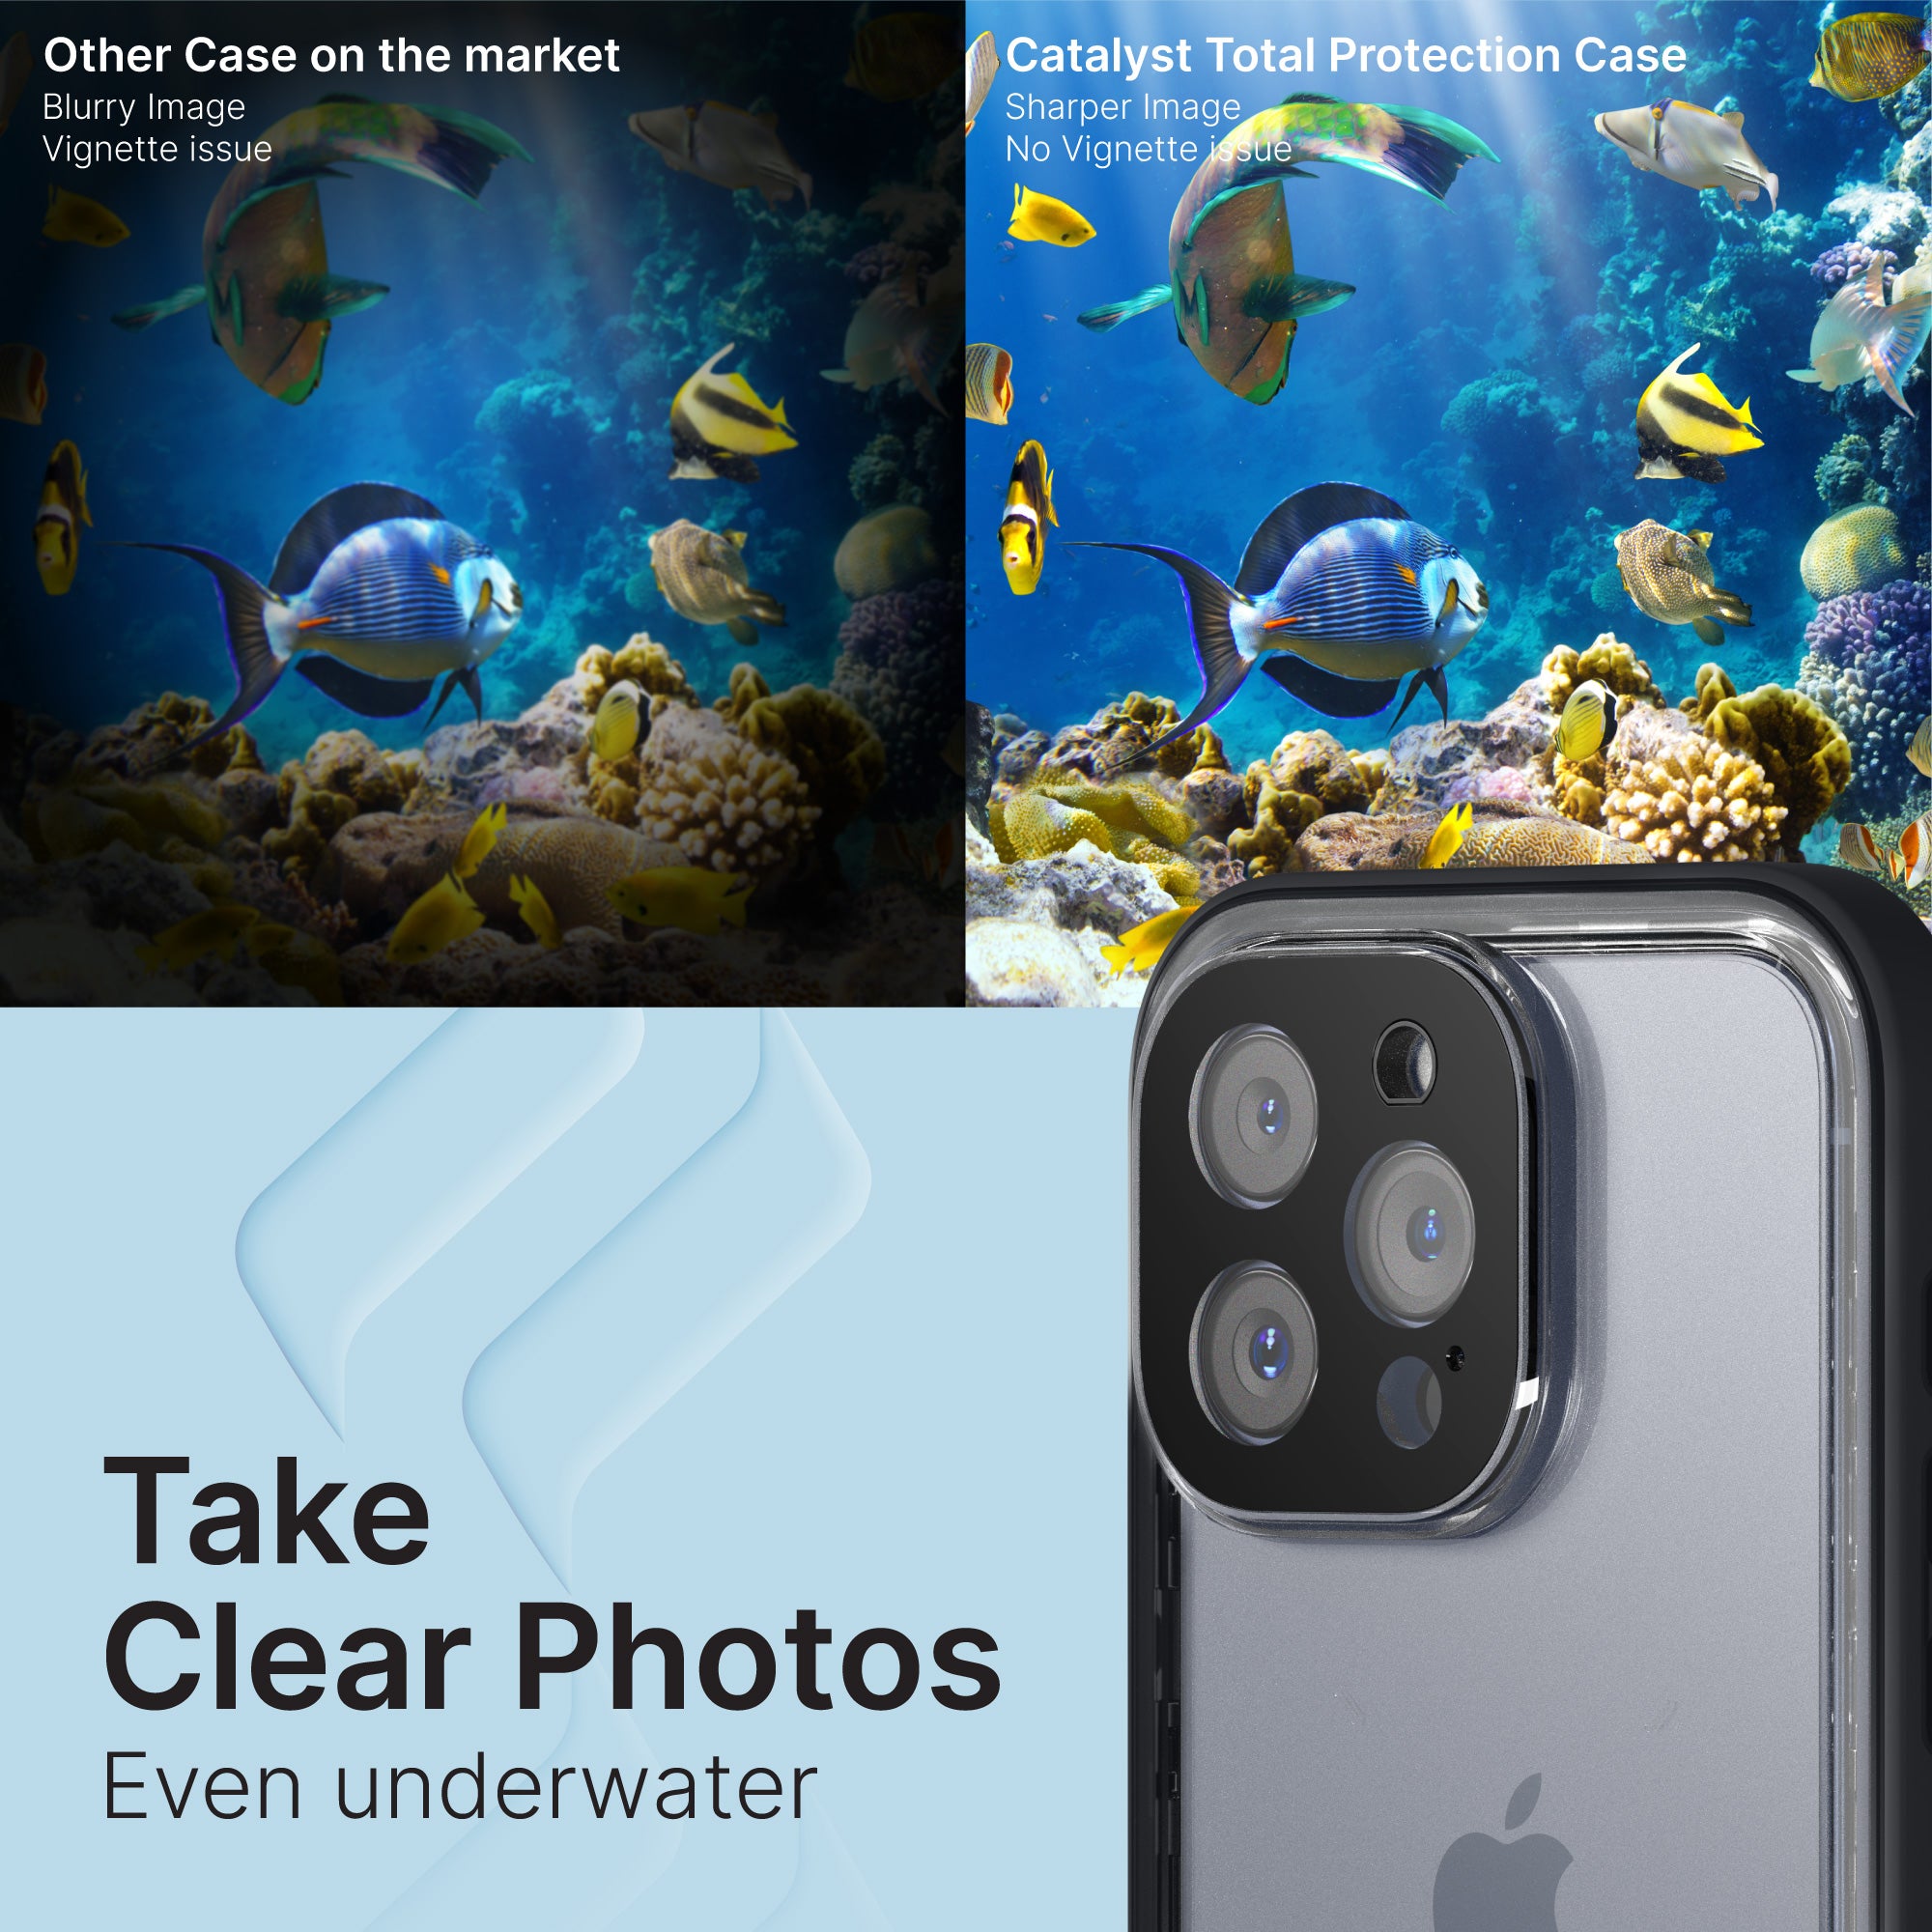 CATIPHO14BLKLP-FBA | Catalyst iPhone 14 Pro Max Waterproof Case Total Protection take clear photos underwater